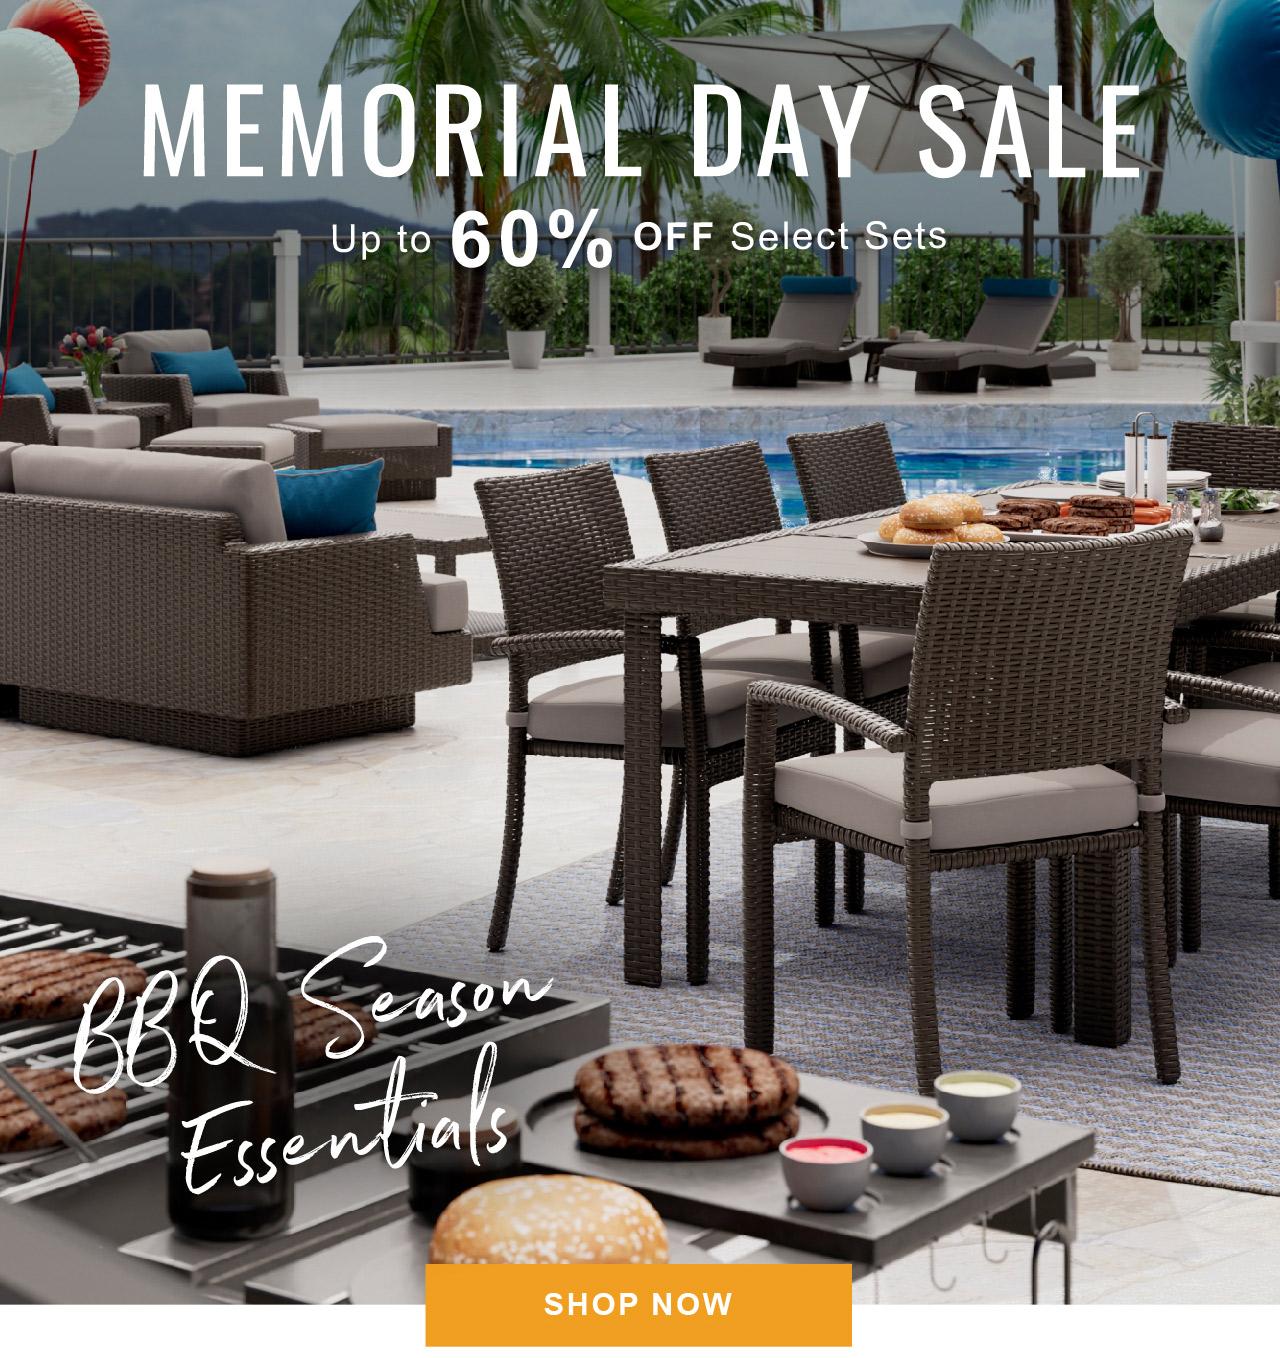 Memorial Day Sale! Save up to 60% off select sets, now through May 28 - Shop Now